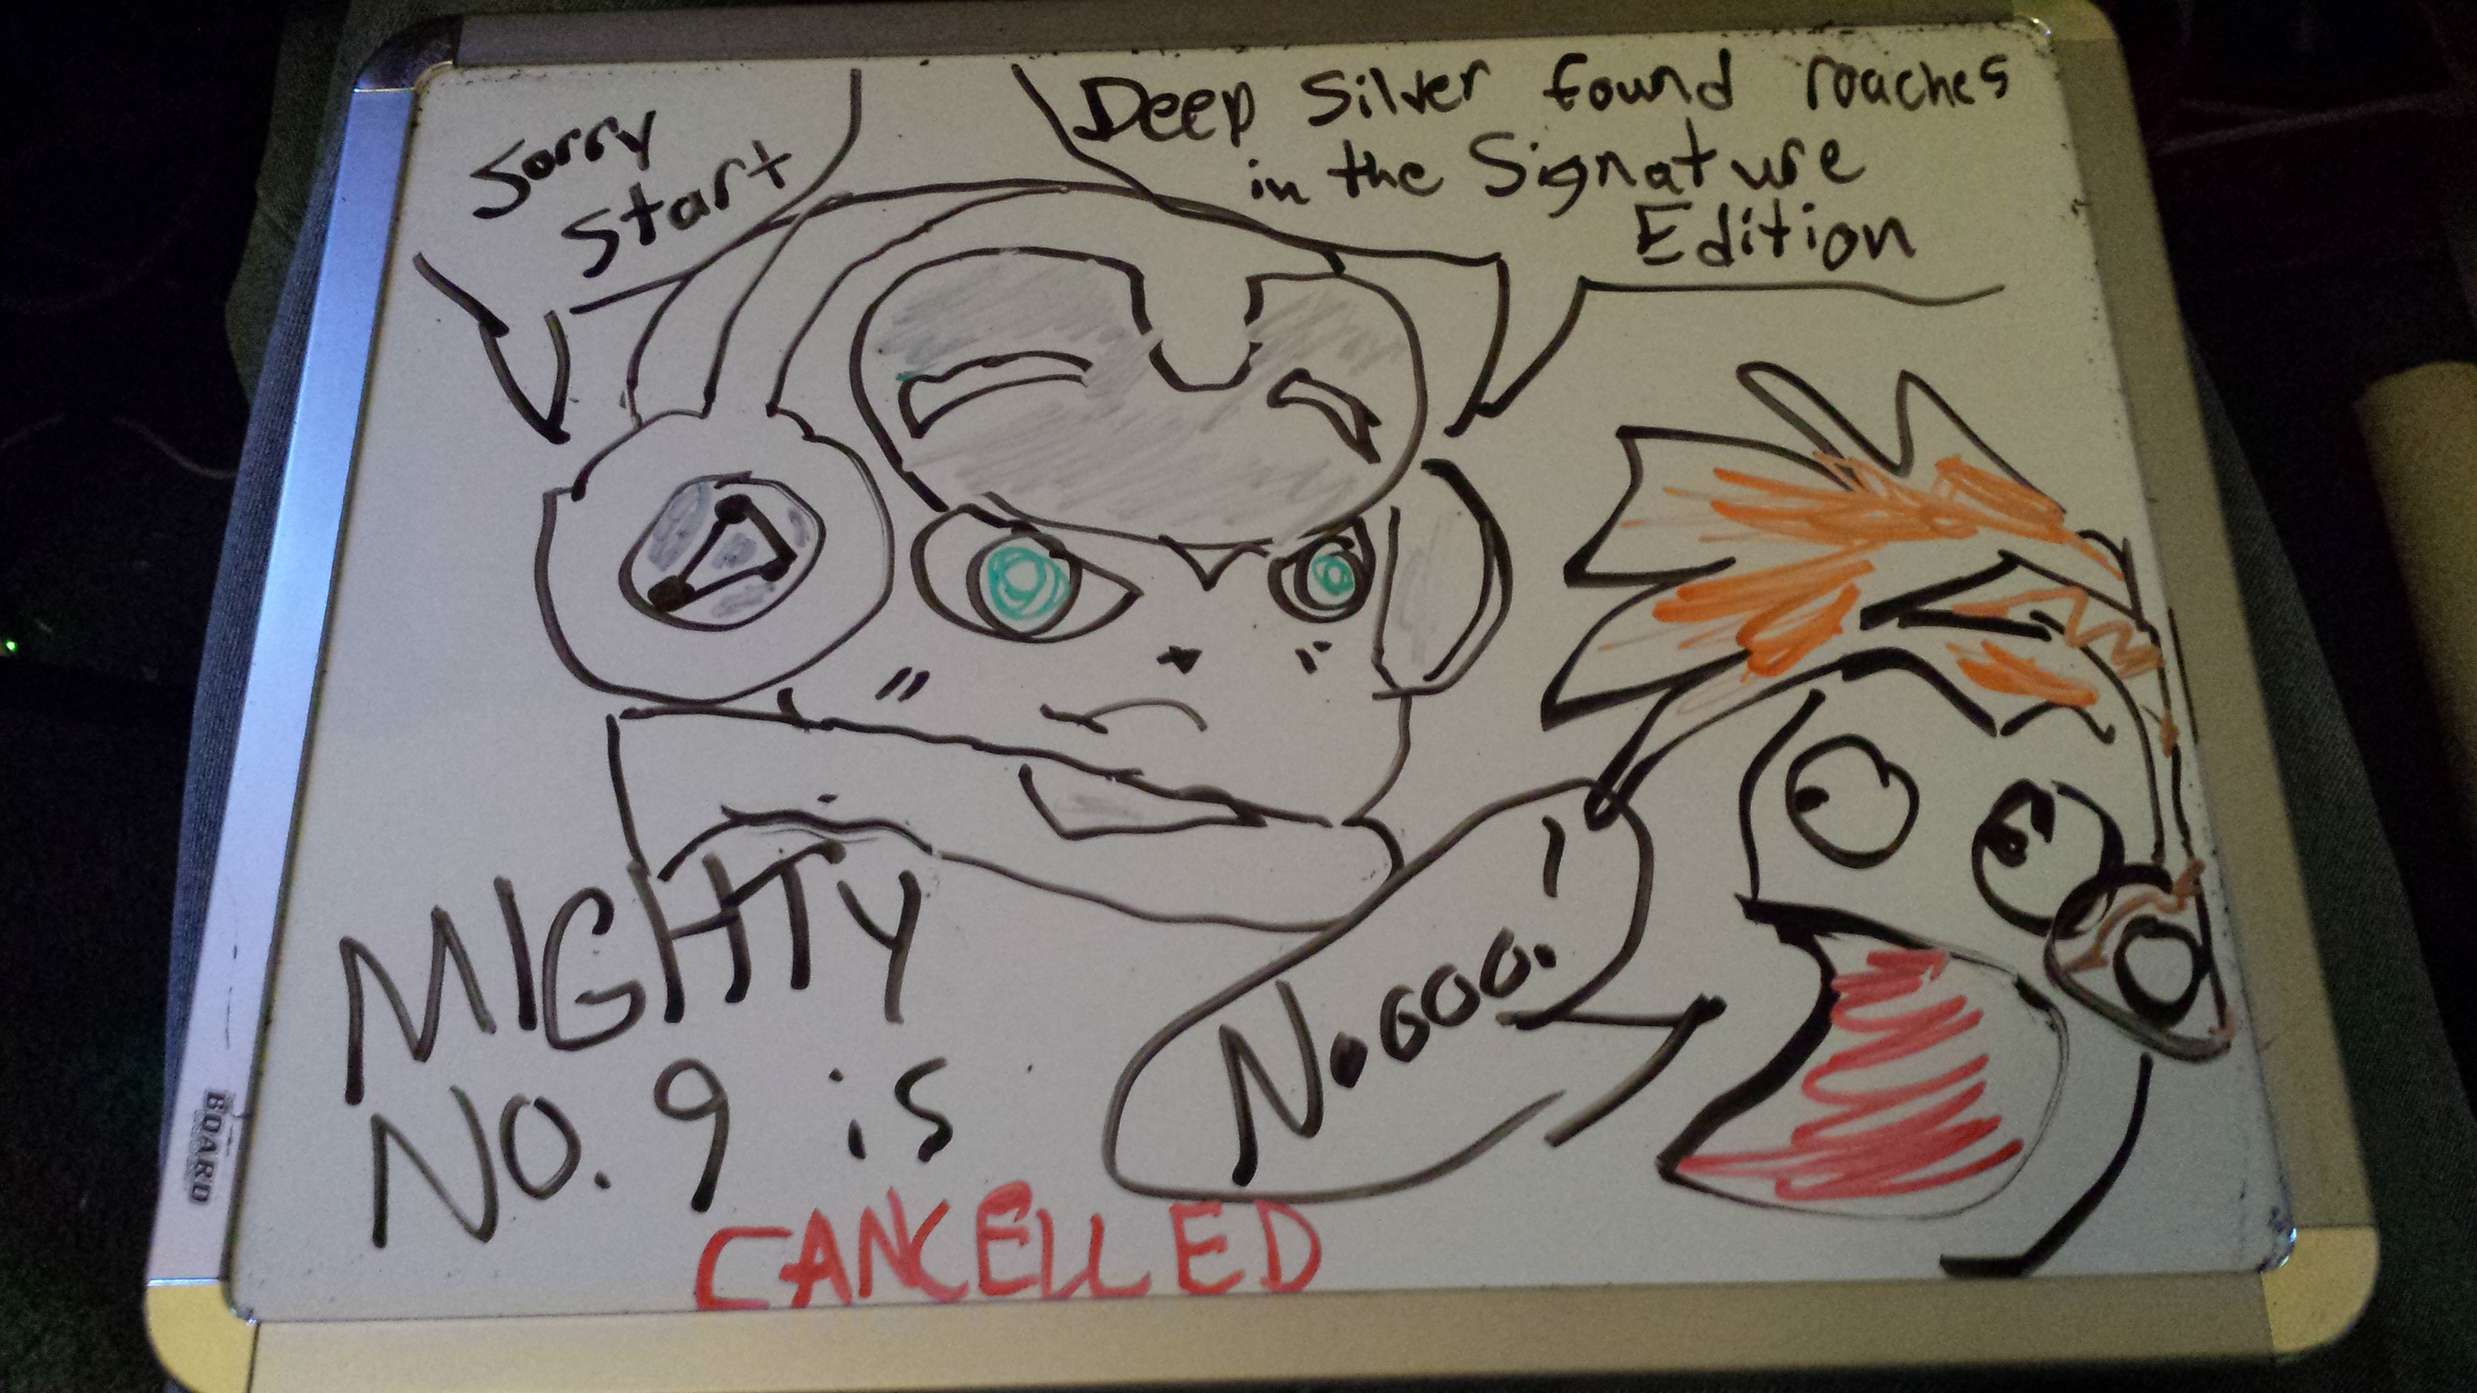 mighty_no_9_cancelled.jpg